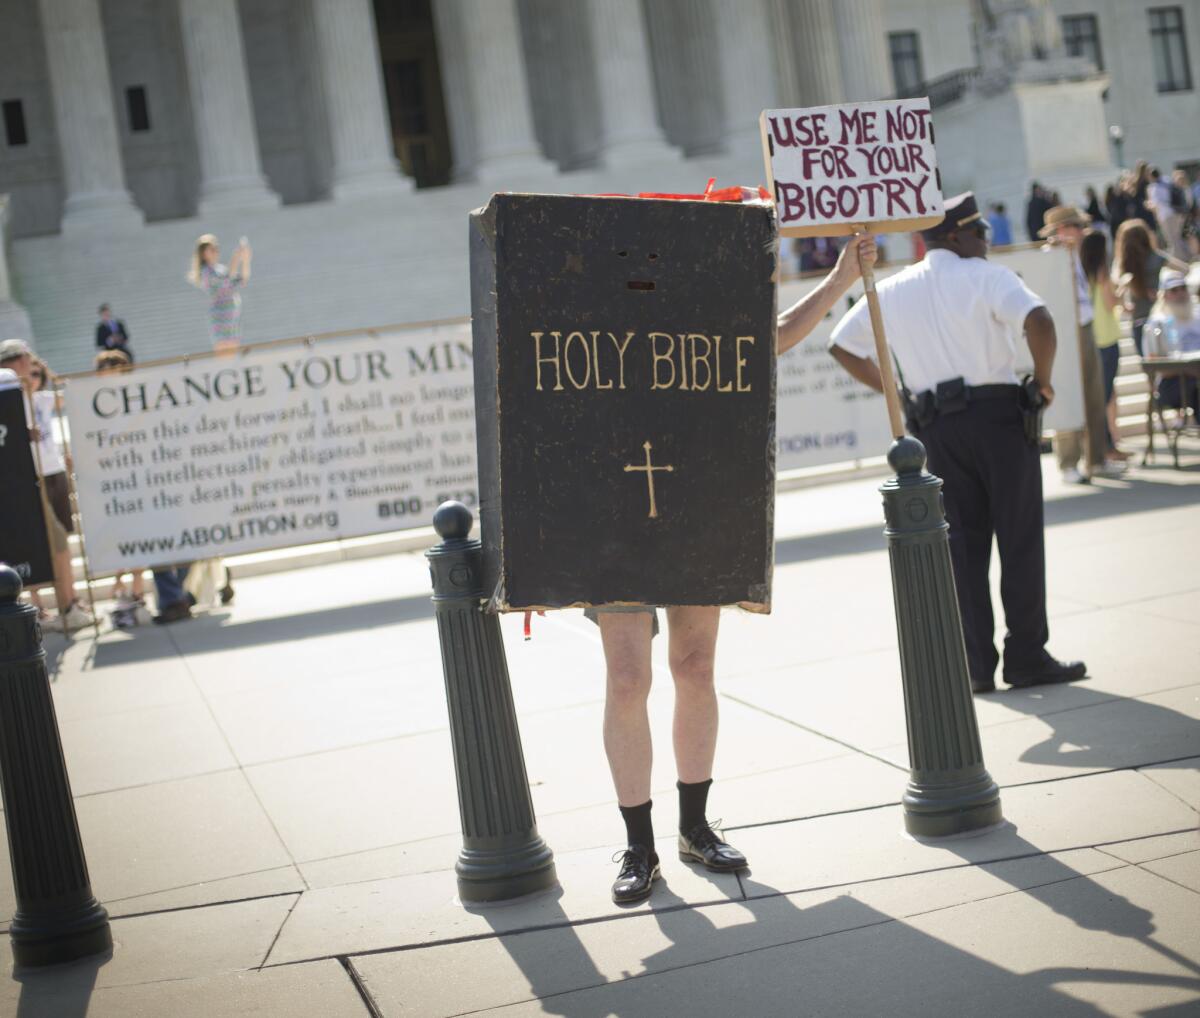 Your new health insurance guidebook? A demonstrator stands outside the Supreme Court building awaiting the Hobby Lobby ruling Monday.